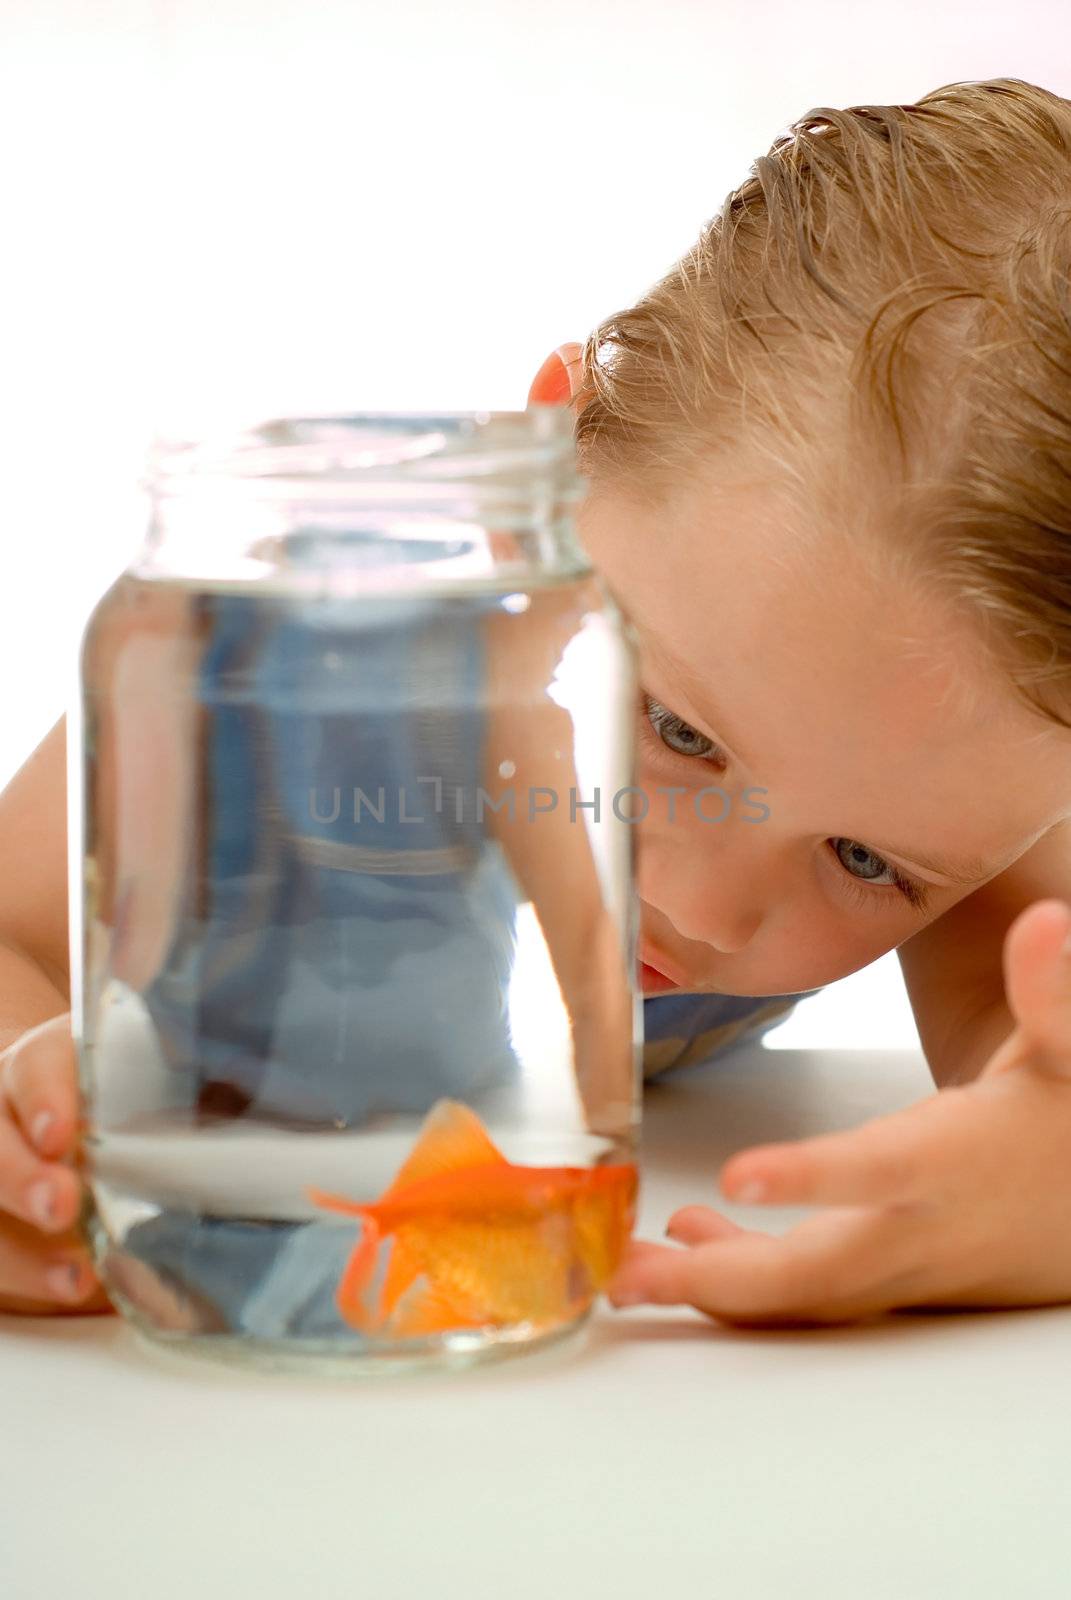 Curious young boy toddler looking and learning about goldfish in jar of water